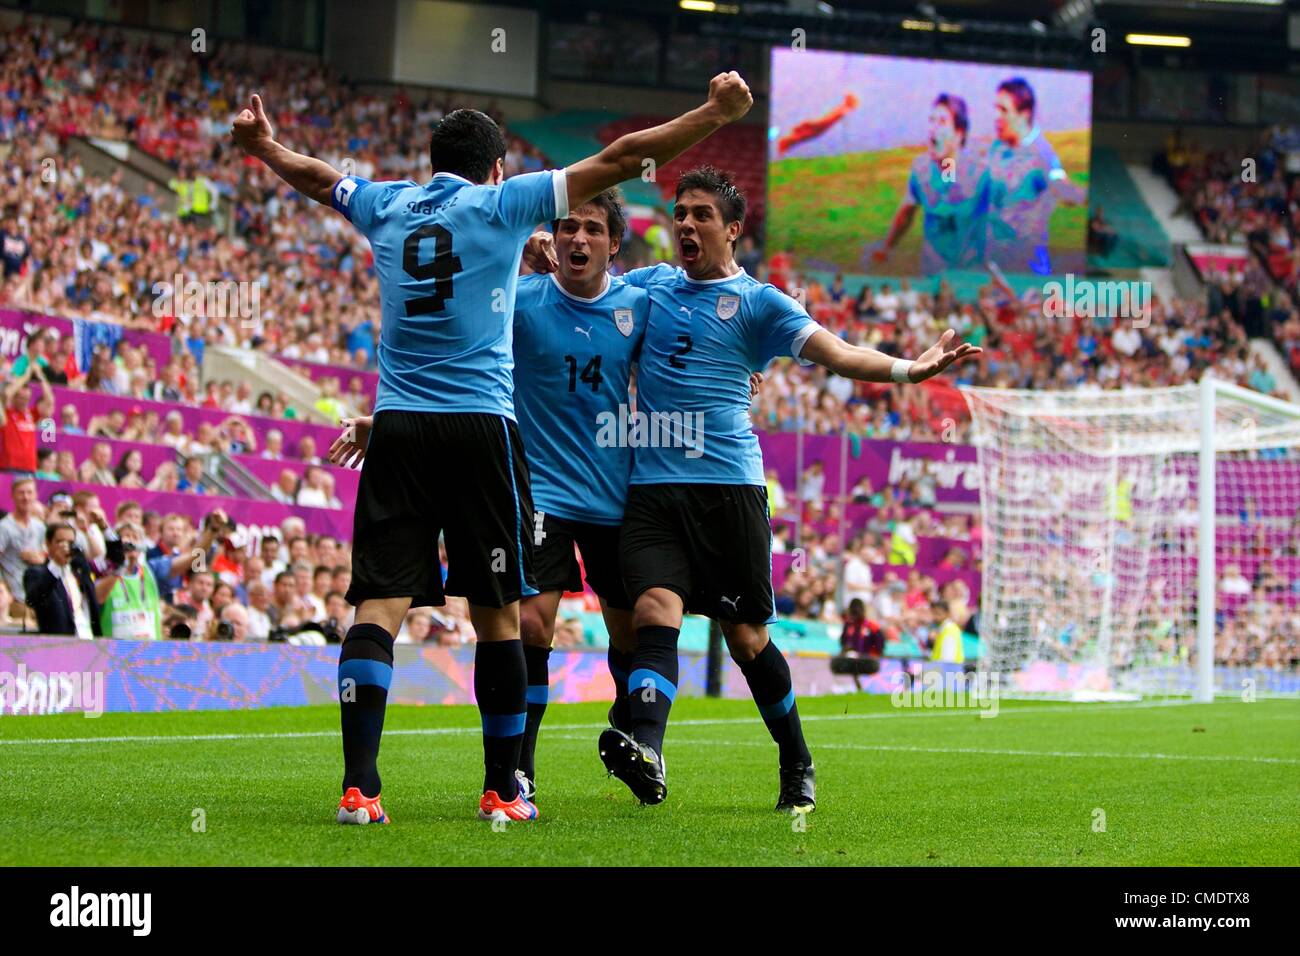 26.07.2012 Manchester, England. Uruguay midfielder Nicolás Lodeiro celebrates his winning goal during the first round group A mens match between United Arab Emirates and Uruguay at Old Trafford. Stock Photo